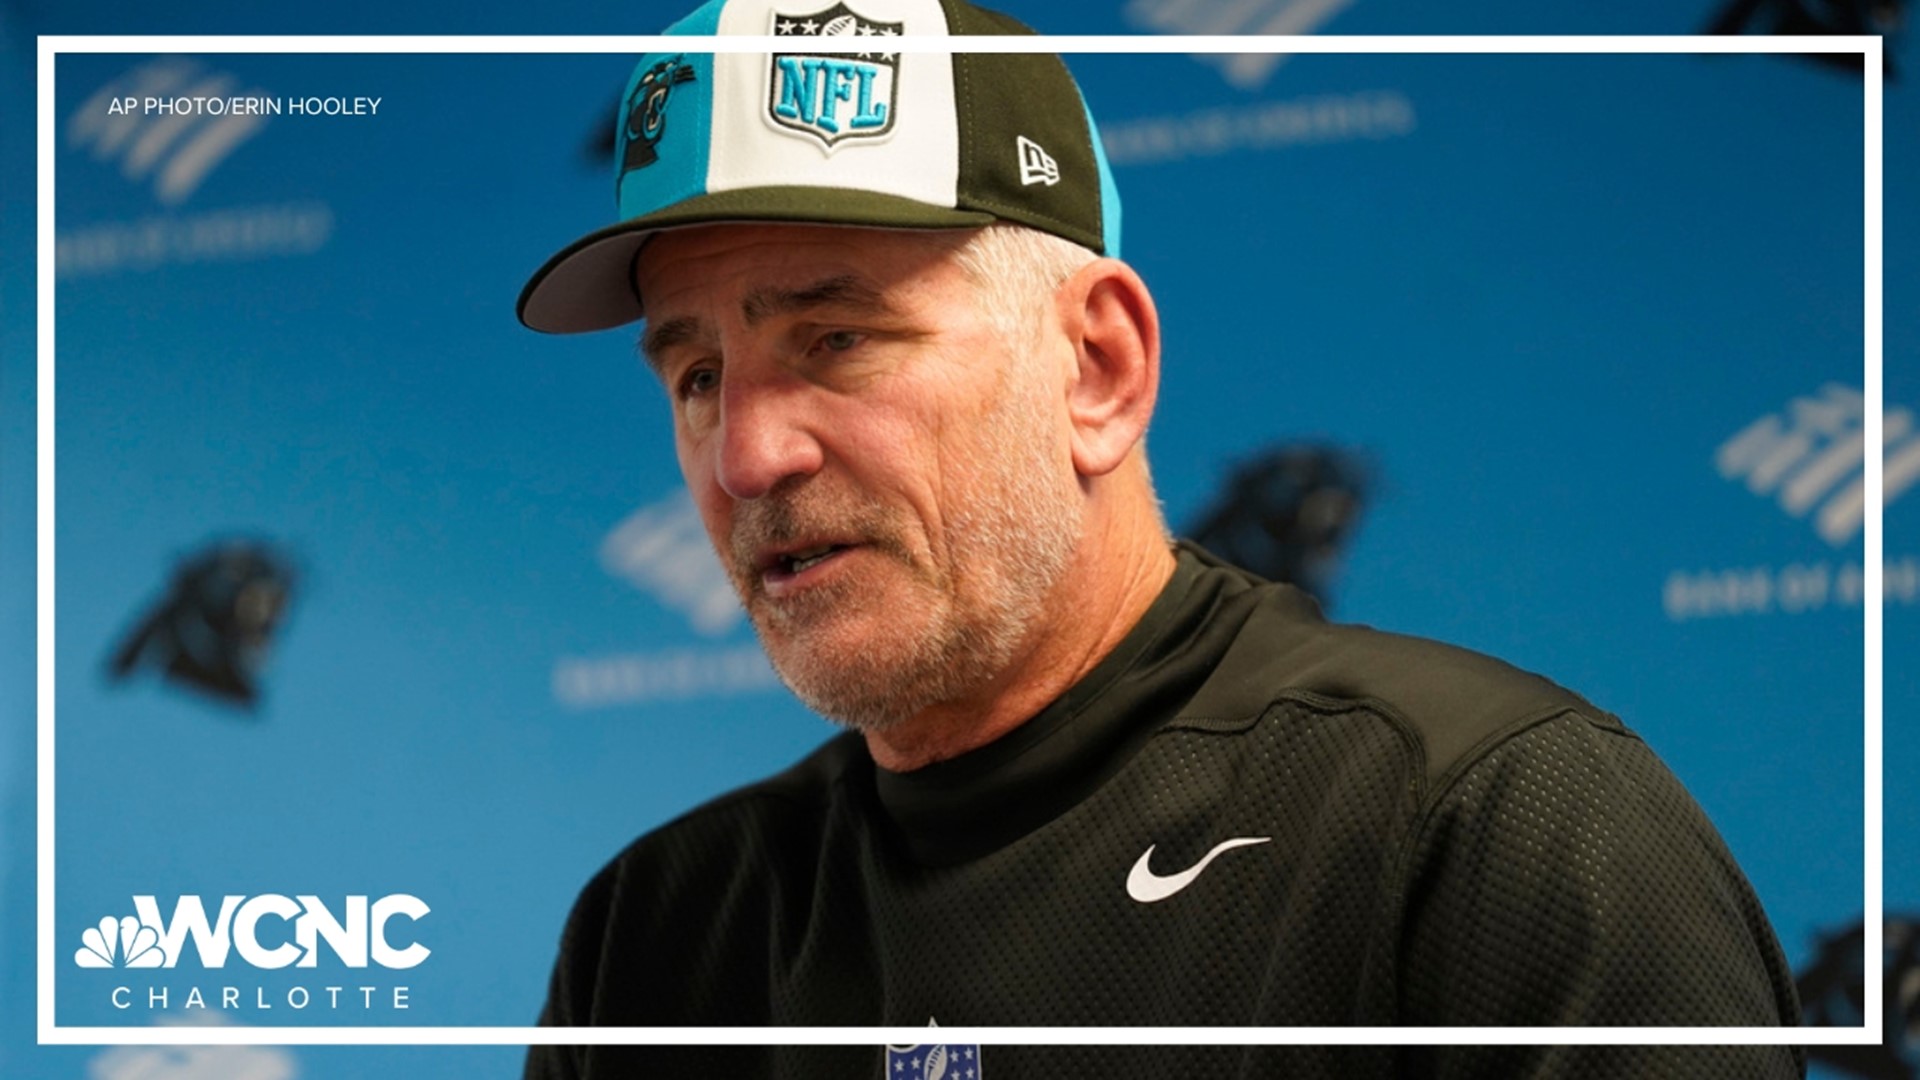 Panthers head coach Frank Reich says he's not considering any staff changes despite the team's 1-8 start. When all is said and done, will he have a choice?